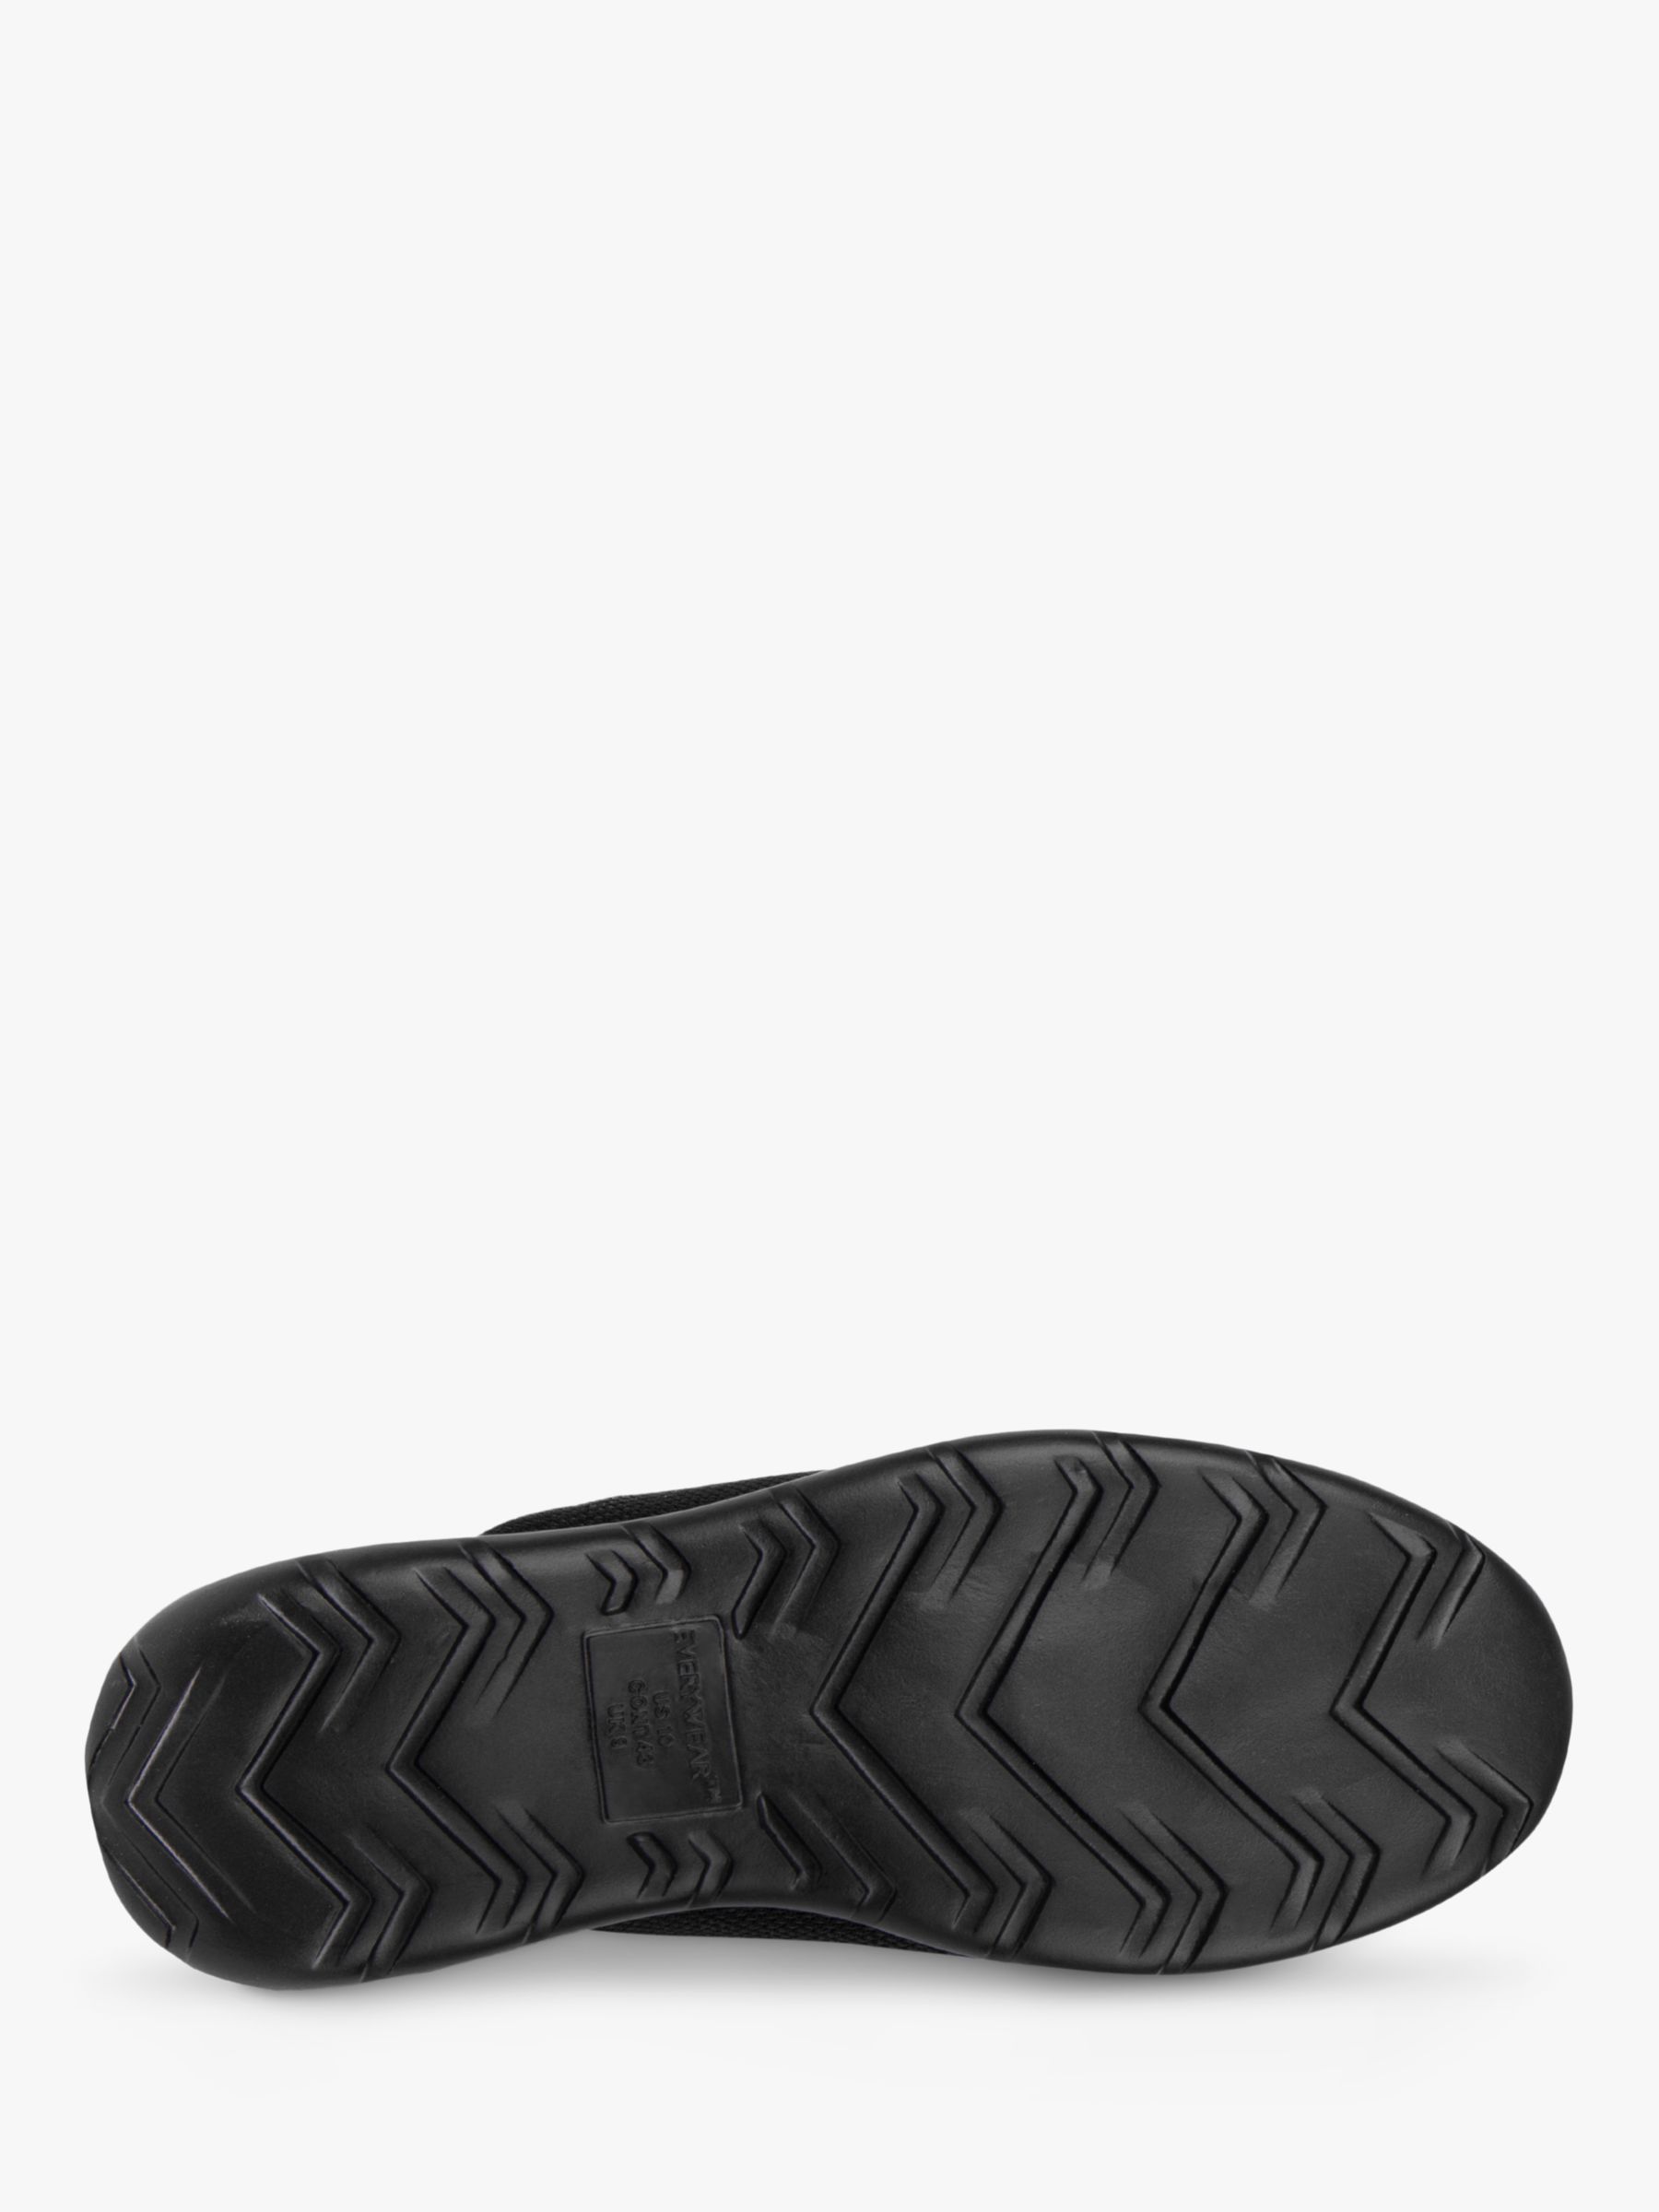 totes Iso Flex Textured Mule Slippers, Black at John Lewis & Partners